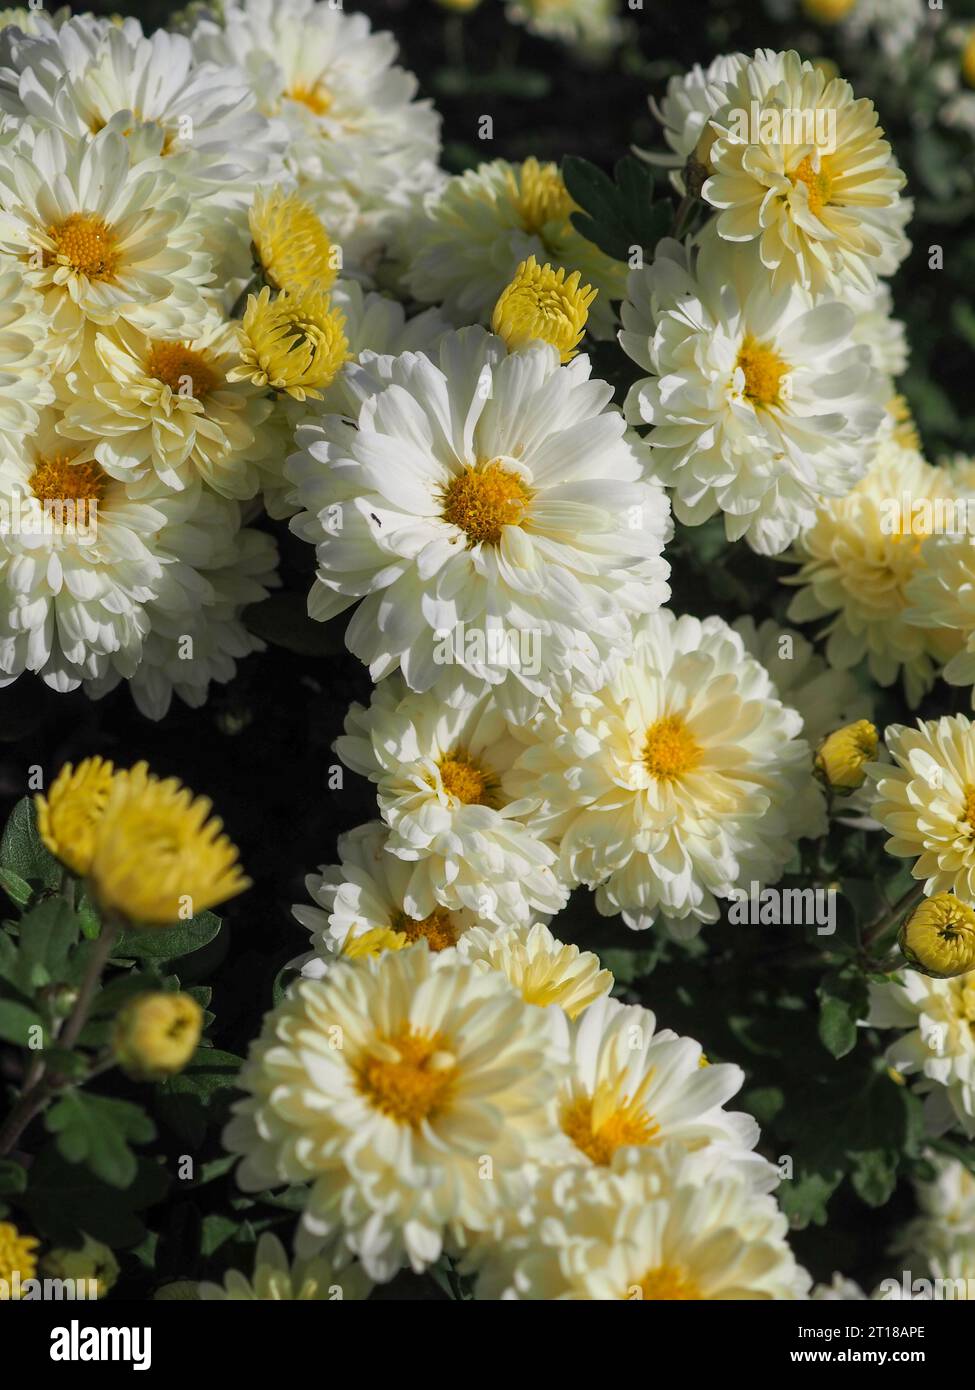 Close up of the hardy white / cream / yellow double flowers of Chrysanthemum 'Poesie' in the autumn sunshine in a British garden in October. Stock Photo